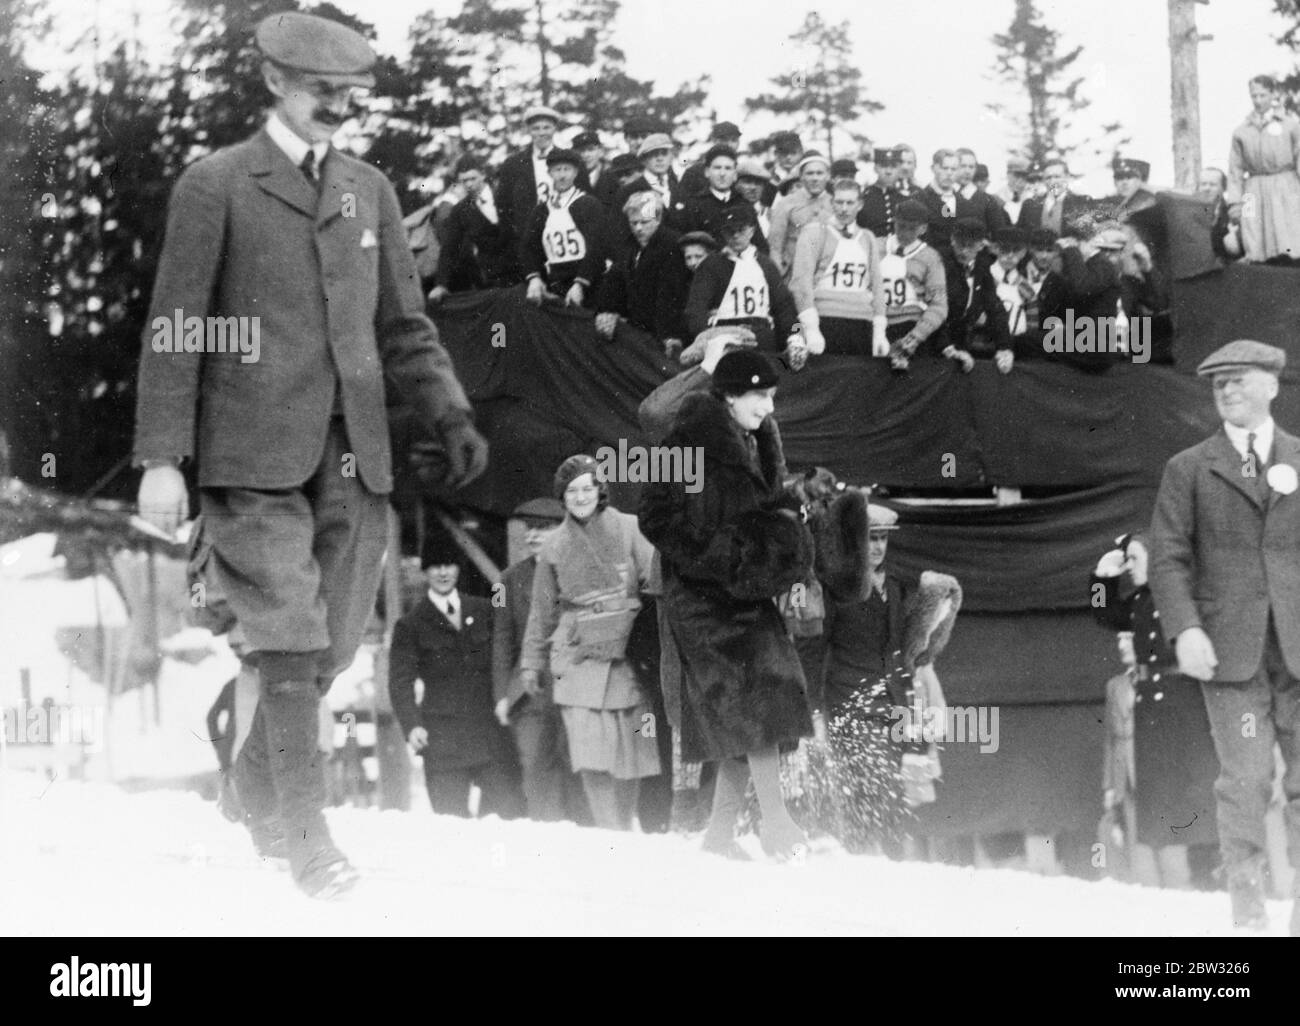 King and Queen of Norway at intenational ski contest . The King and Queen of Norway attended the international ski contests at Holmenkollen , Norway . The King and Queen at Holmenkollen to watch the contests. 16 March 1932 Stock Photo